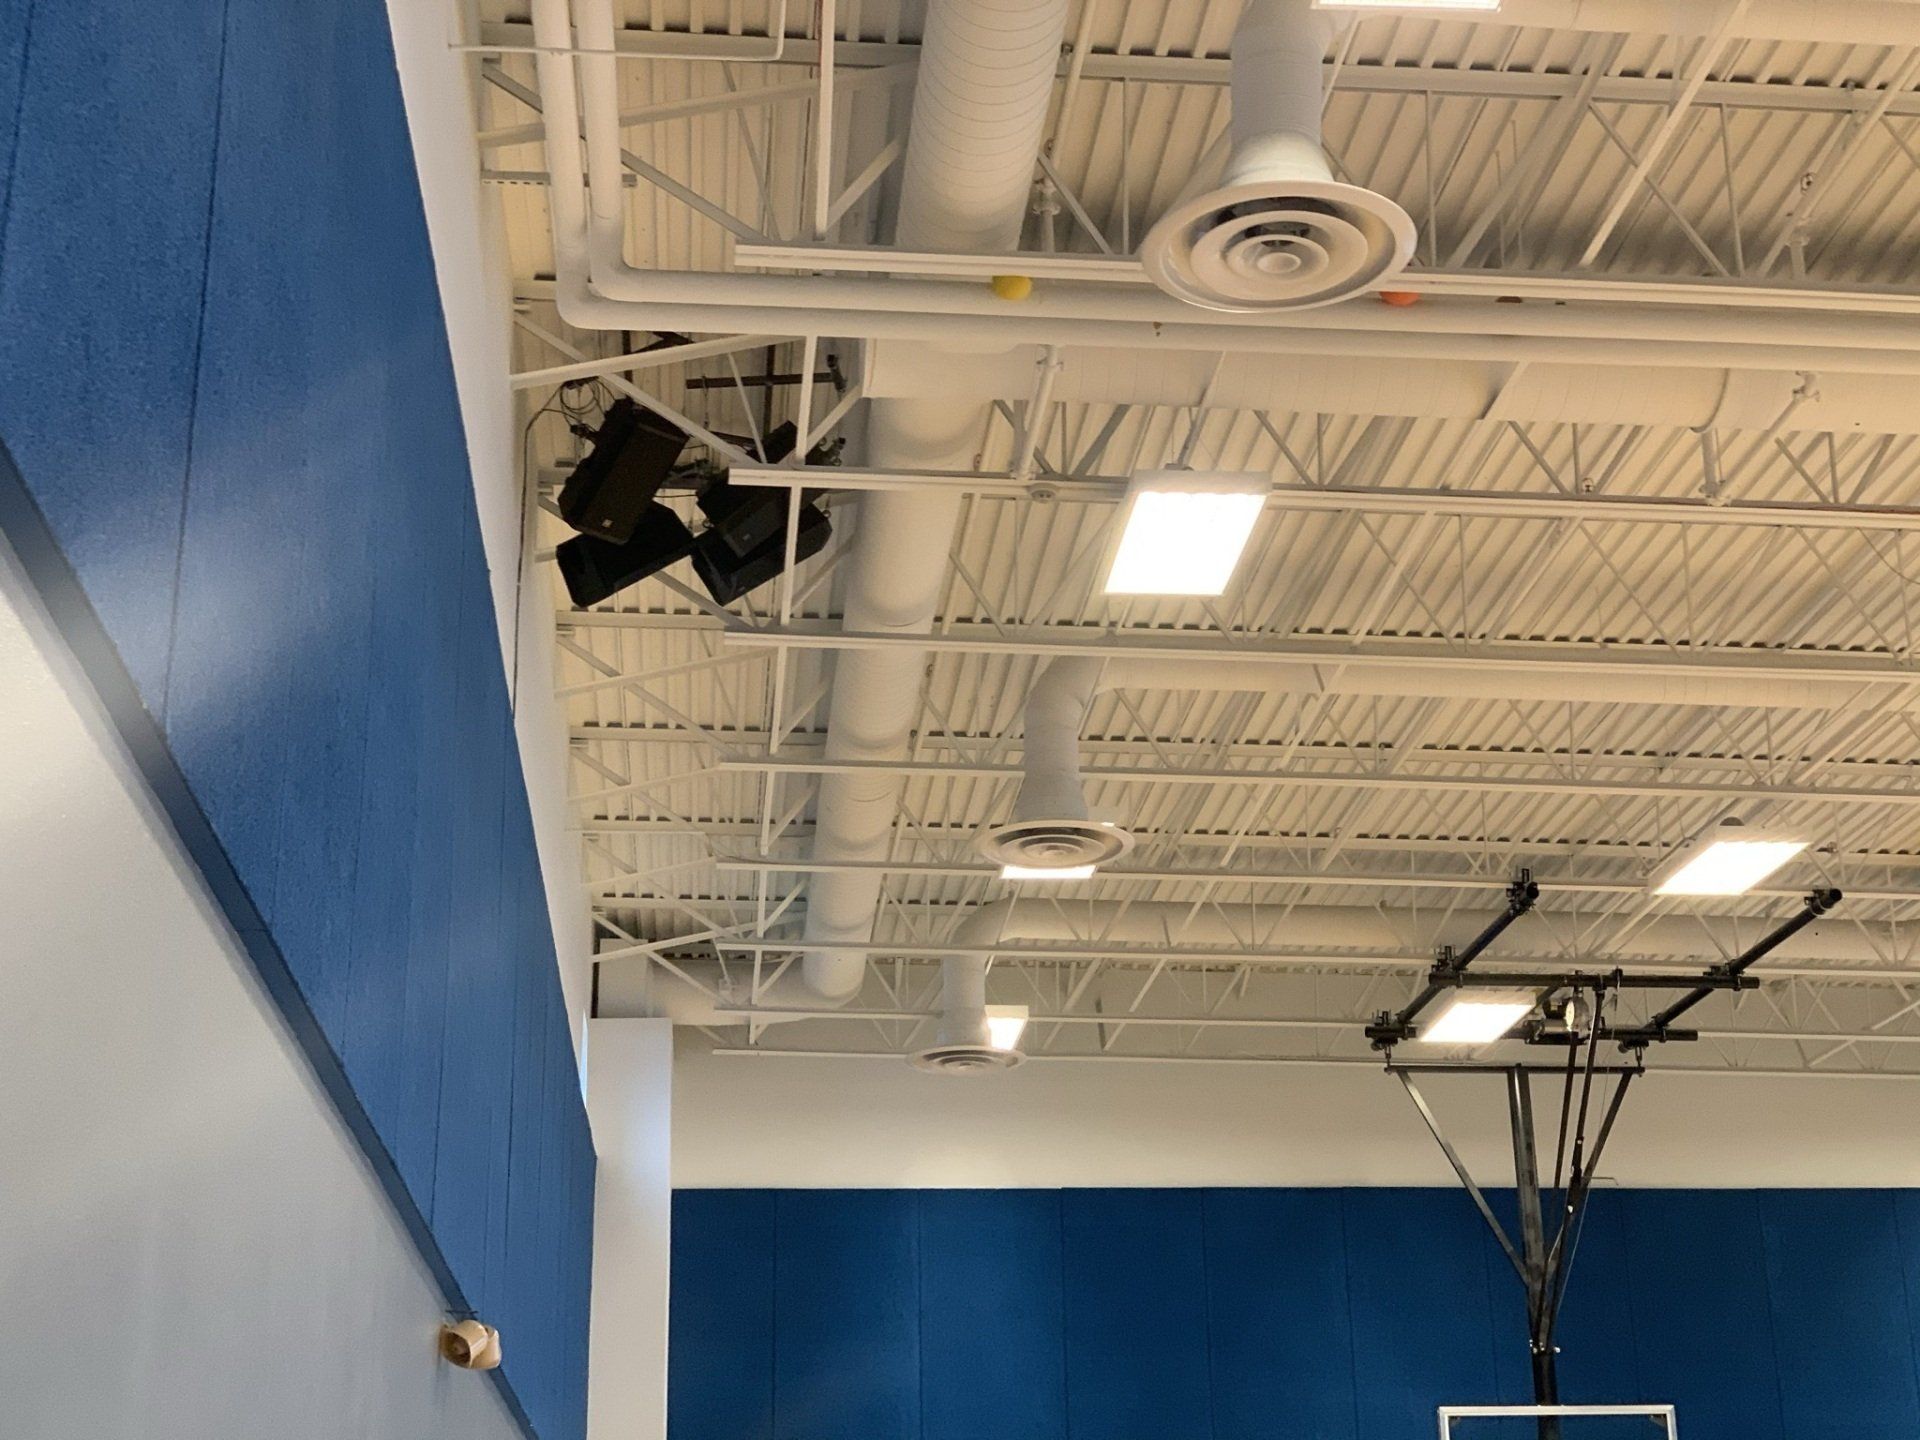 A basketball hoop is hanging from the ceiling of a gym